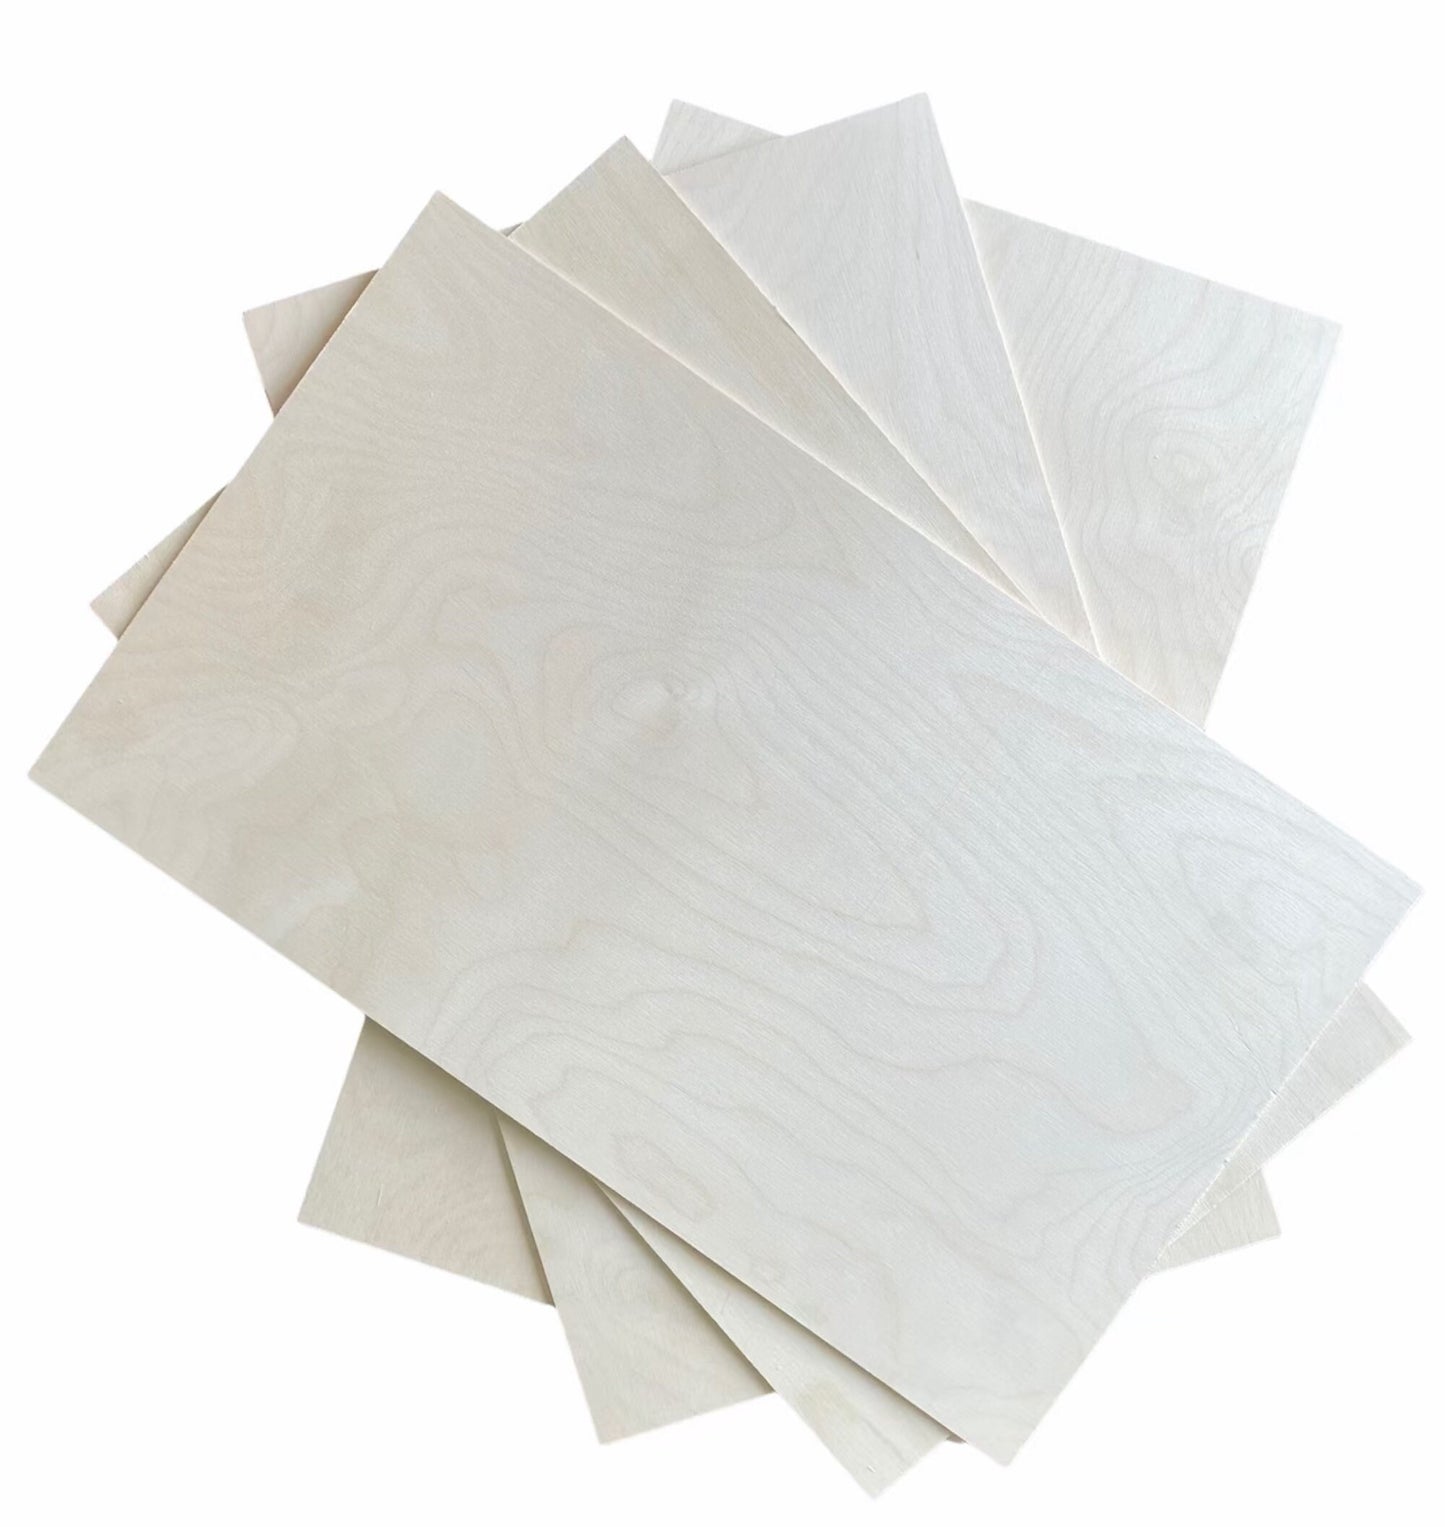 Premium Baltic Birch Plywood Sheets Ideal for Crafts, Lasers, Burning, CNC, Scroll Saws and More | 3mm (1/8") & 6mm (1/4")